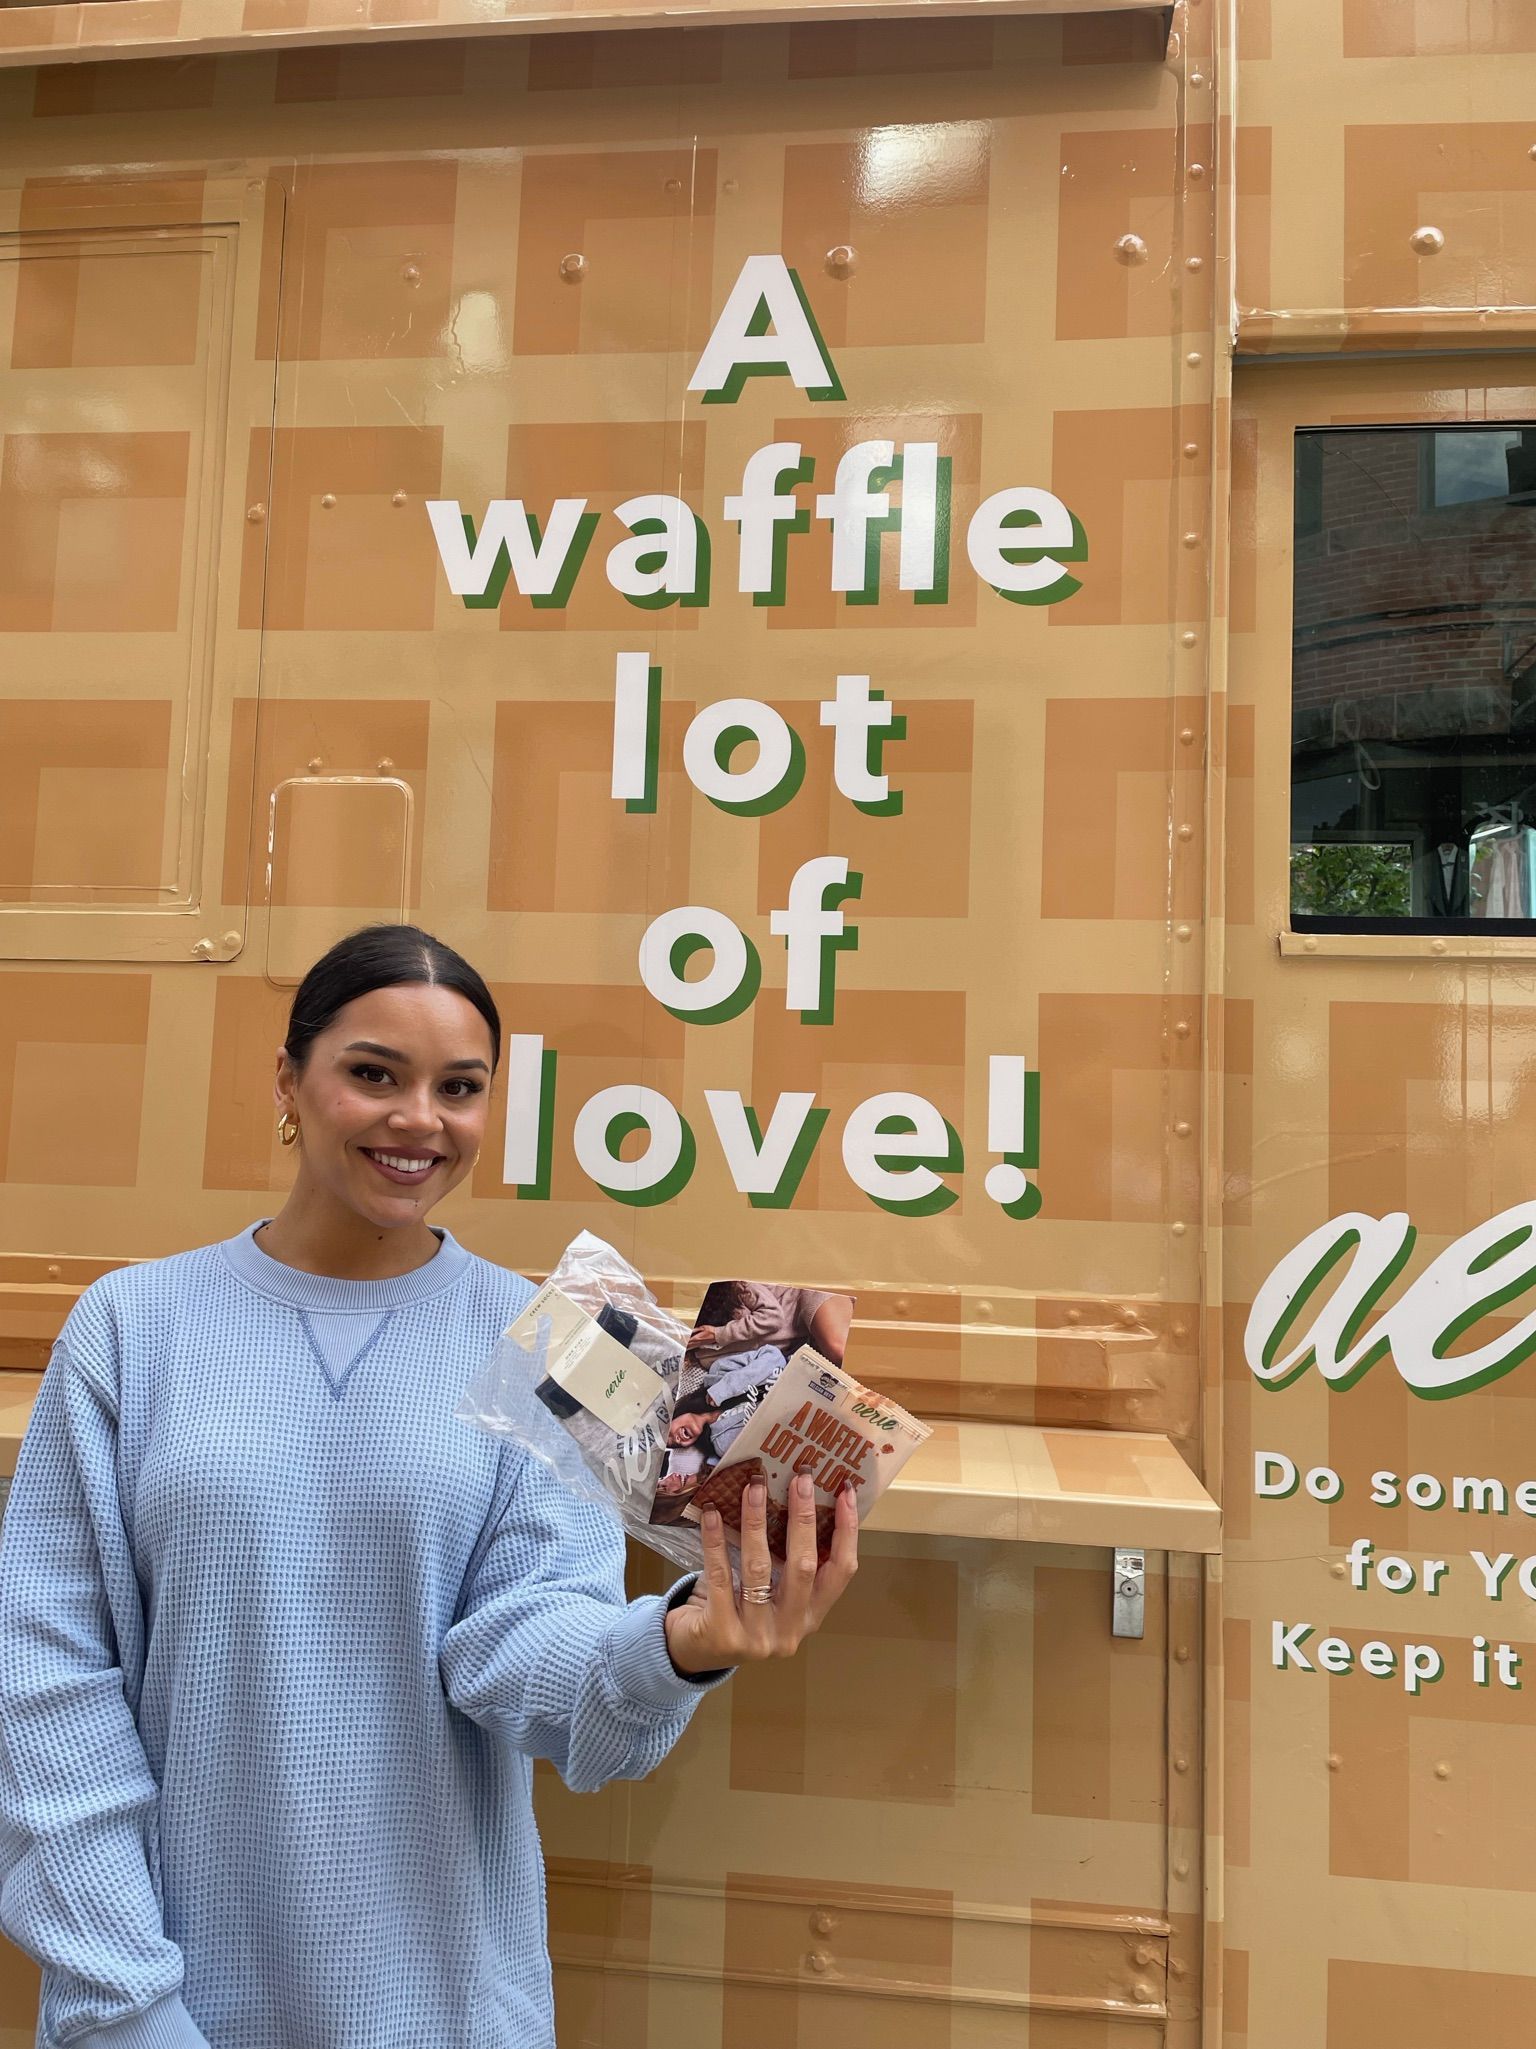 Aerie Waffle Truck for Waffle clothing line